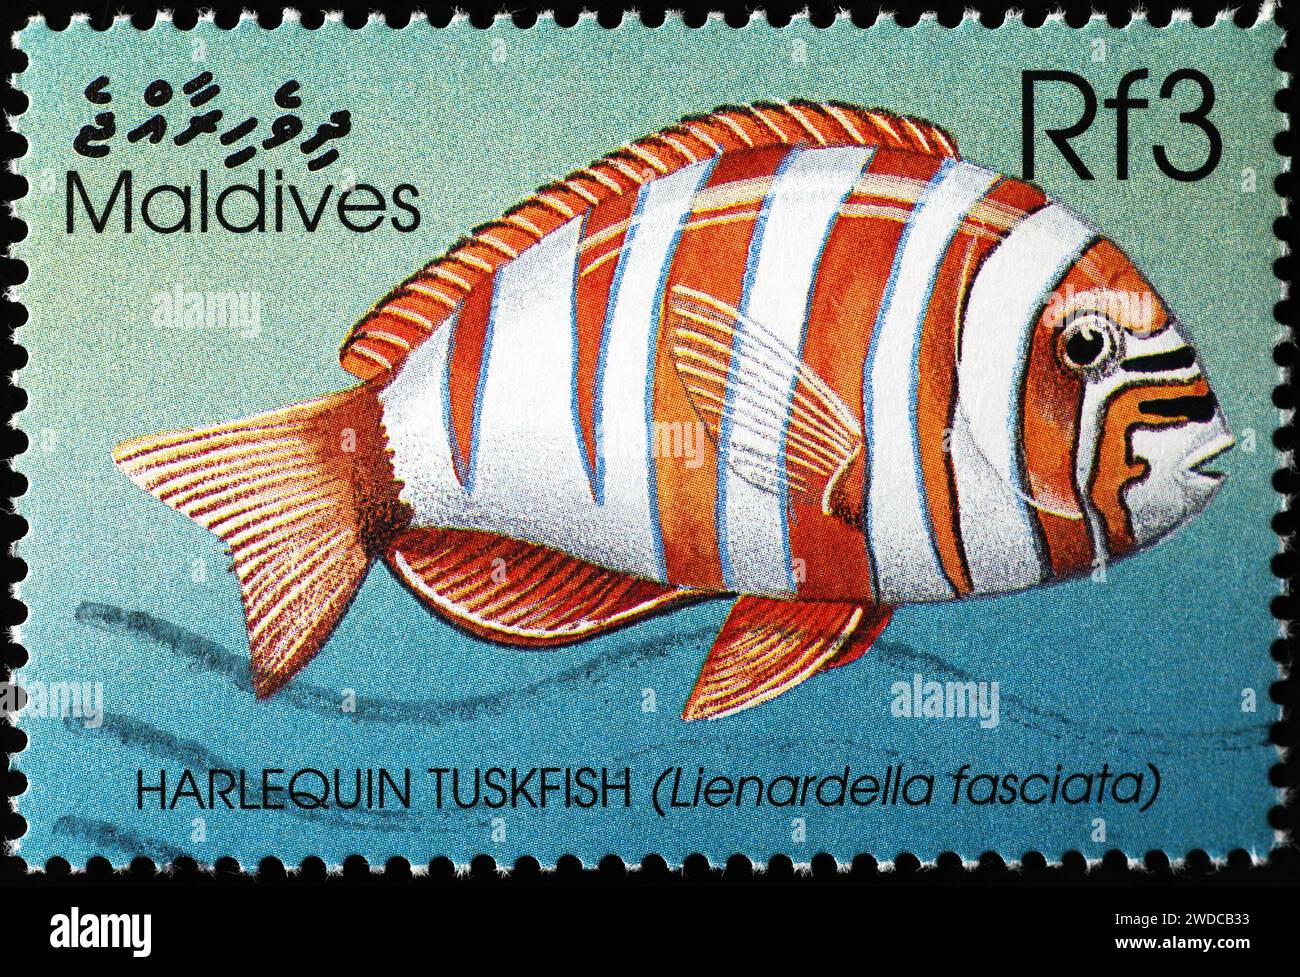 Harlequin tuskfish on postage stamp from Maldives Stock Photo